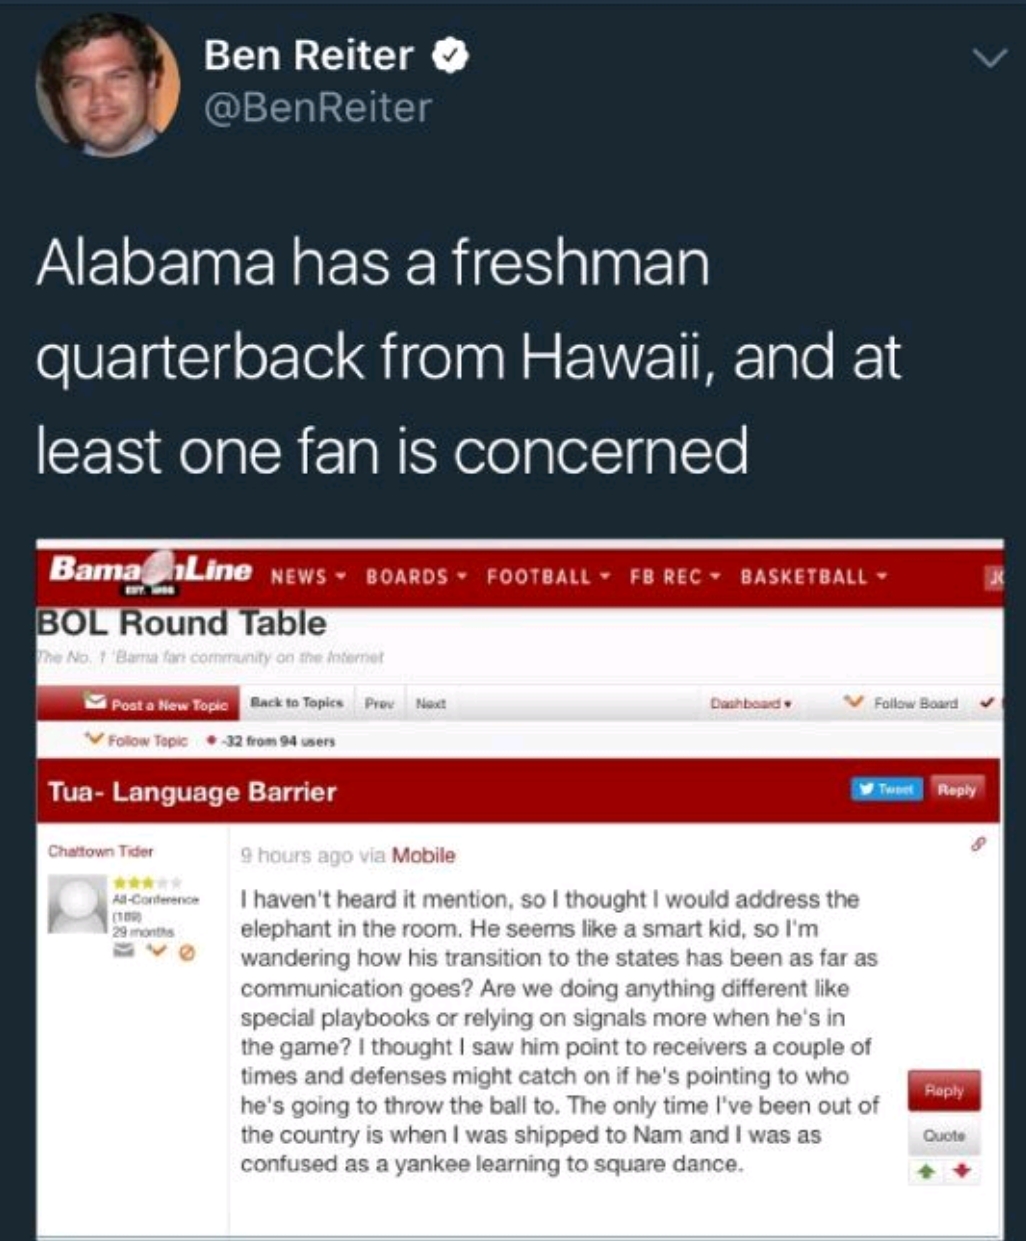 software - Ben Reiter Alabama has a freshman quarterback from Hawaii, and at least one fan is concerned Boards Football Feric Basketball Bama Line News Bol Round Table Tua Language Barrier hour ago Mobile I haven't heard it mention, so I thought I would a